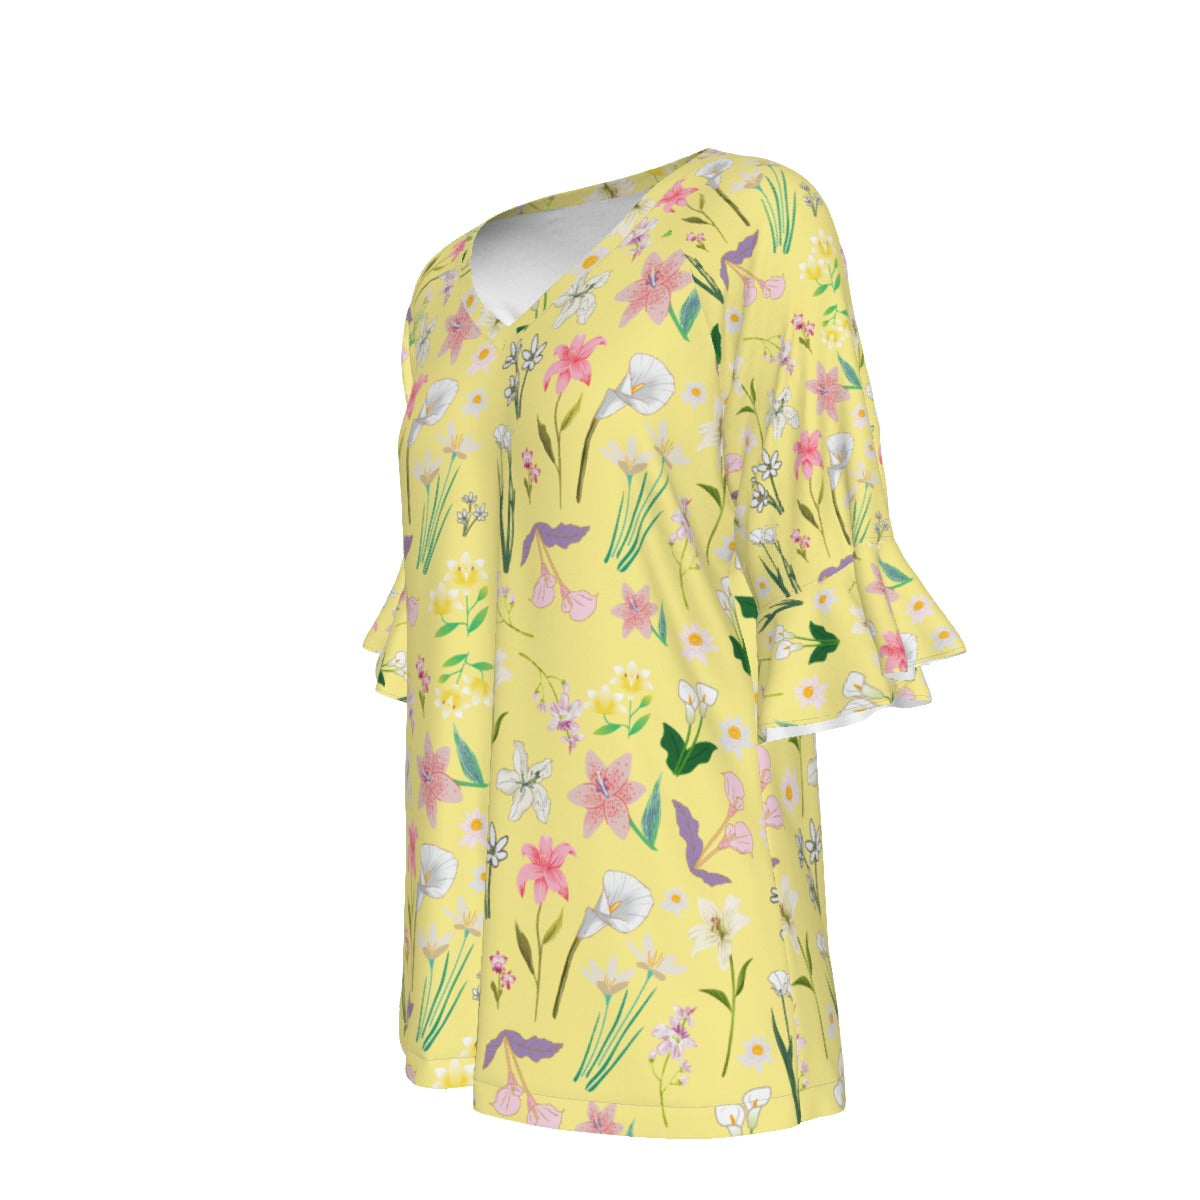 Graphic Lillies Yellow V Neck Top with Bell Sleeves up to 3 XL